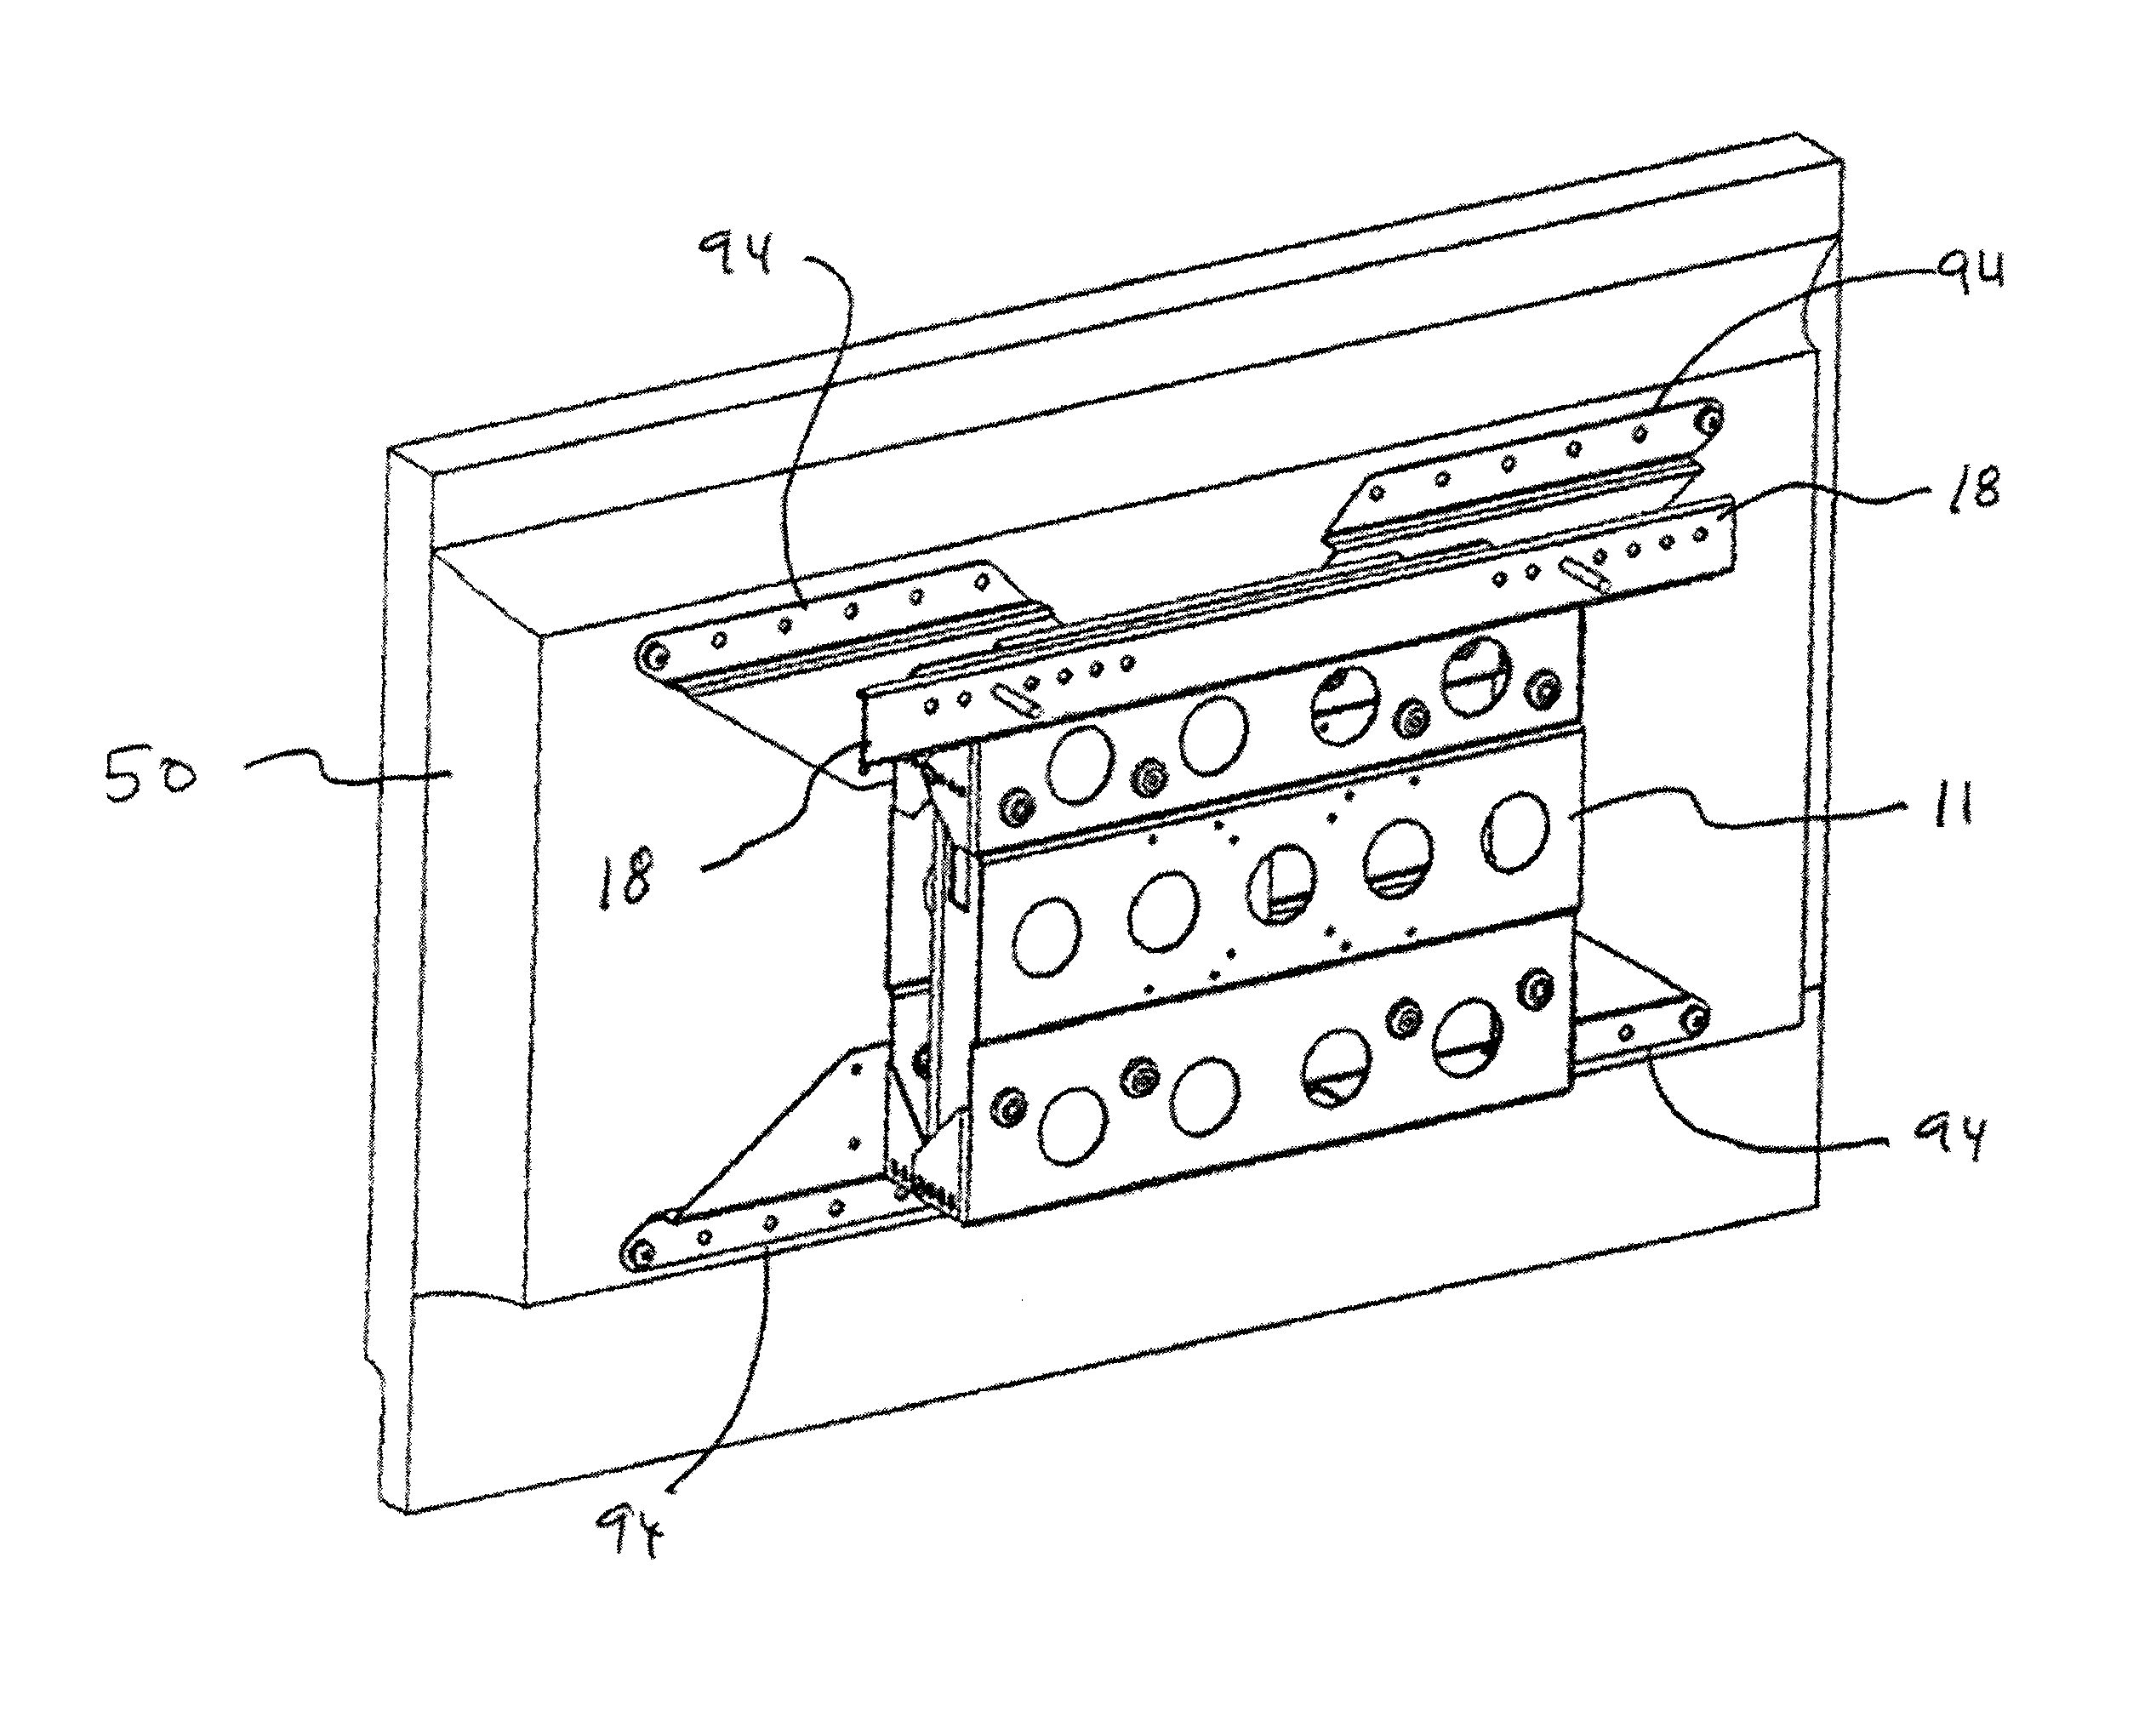 Method and device for wall mounting flat panel monitor and storing associated audio/video components